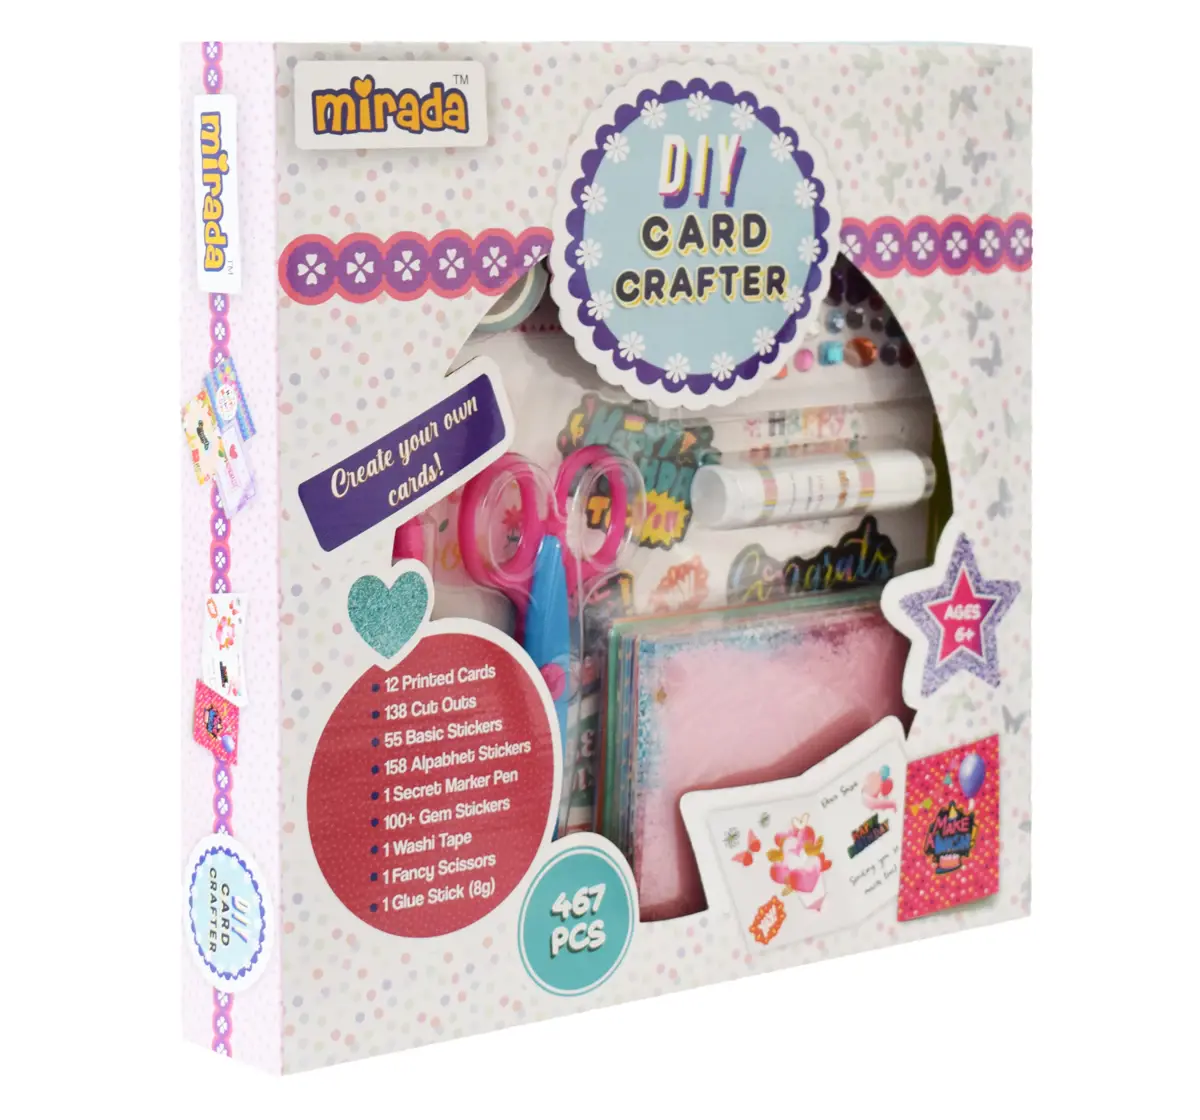 DIY Card Crafter Kit by Mirada, Arts and Crafts for Kids of Age 3 Years+, Creative Play for Kids, Multicolour